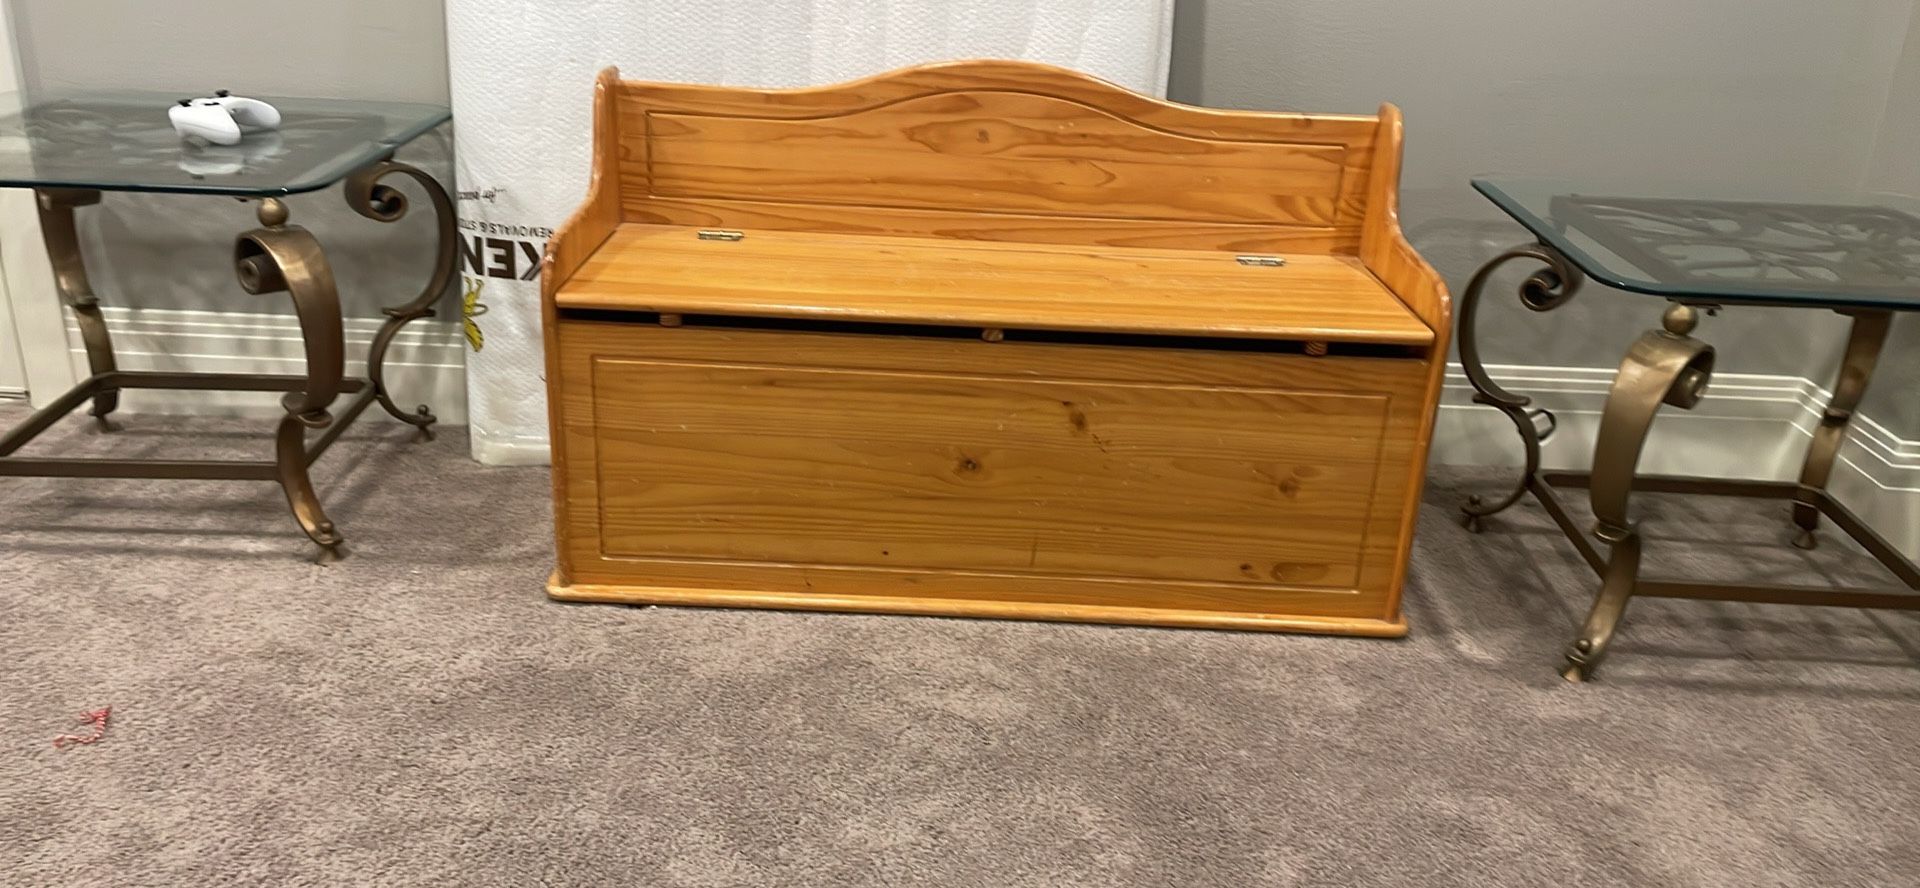 Toy Chest/Seat Bench (Wood)